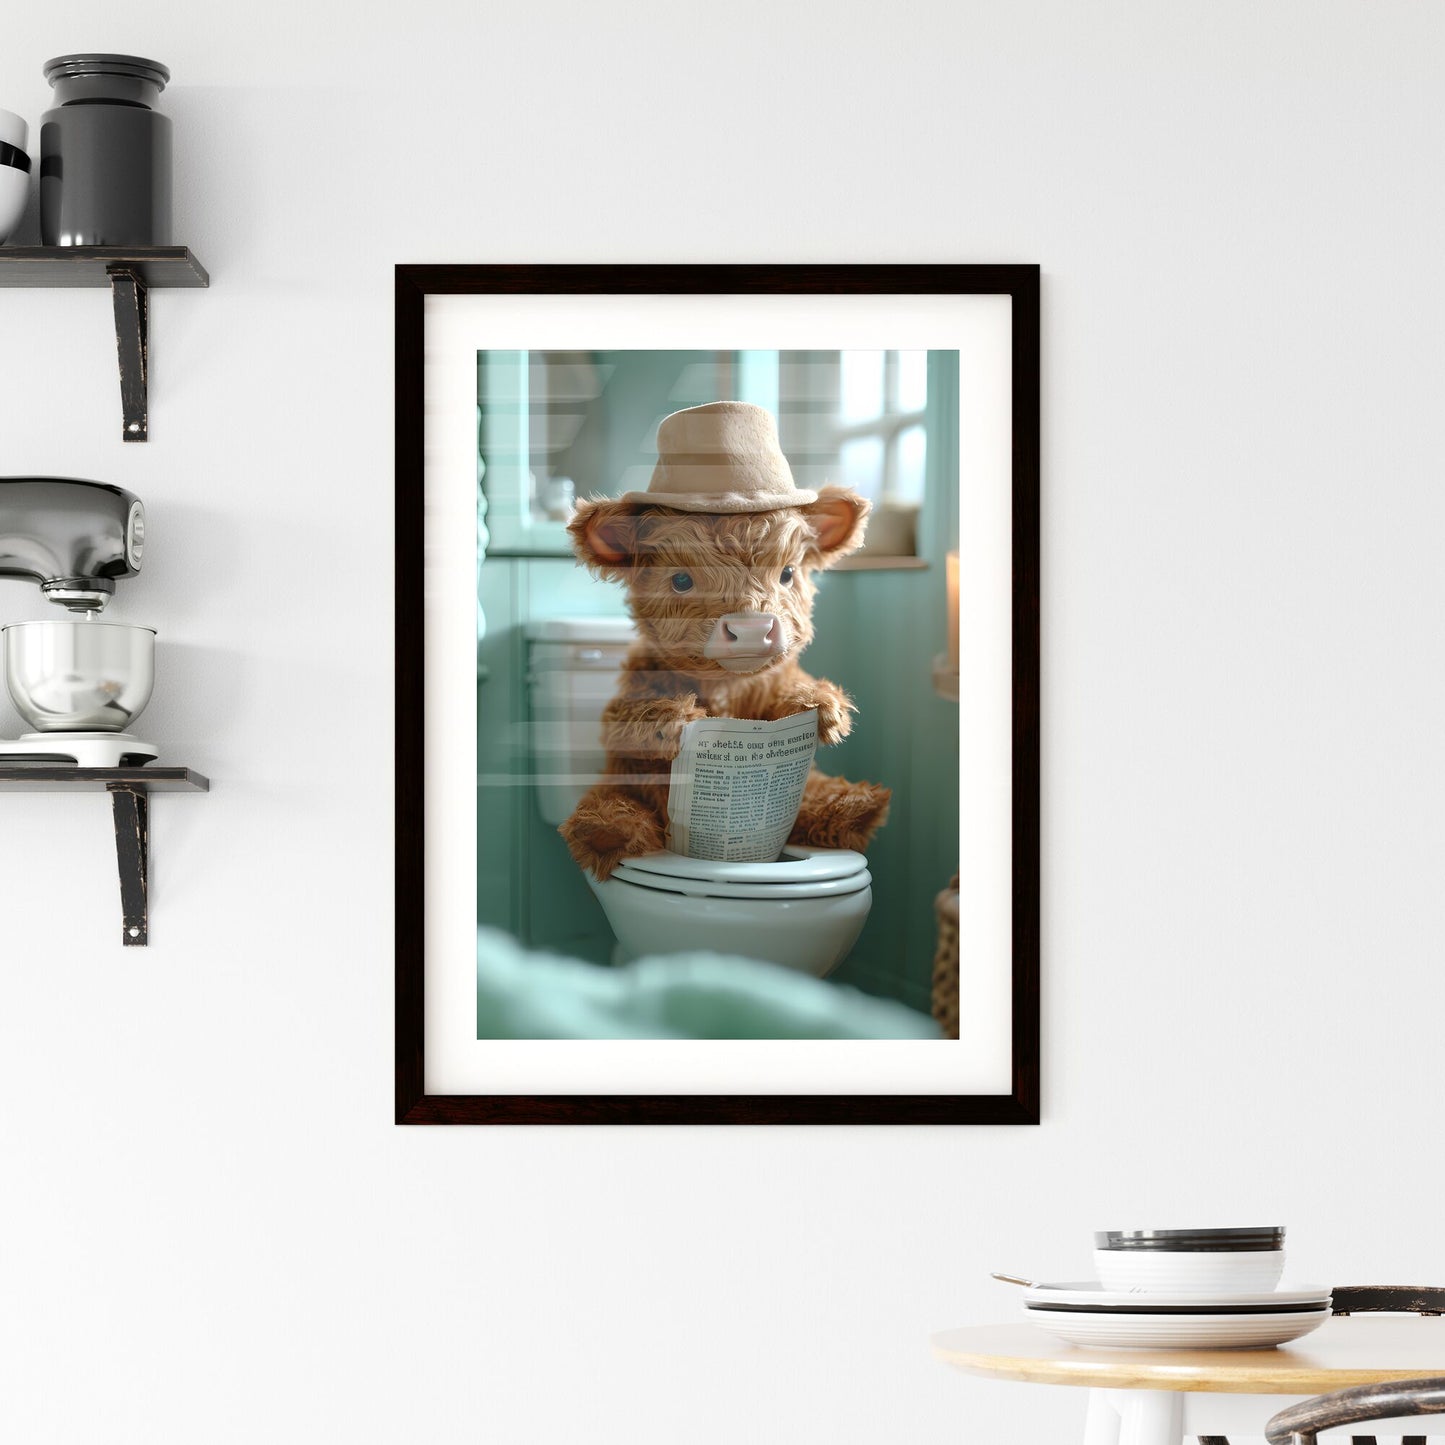 A cow sitting on a tiny toilet - Art print of a stuffed animal sitting on a toilet Default Title